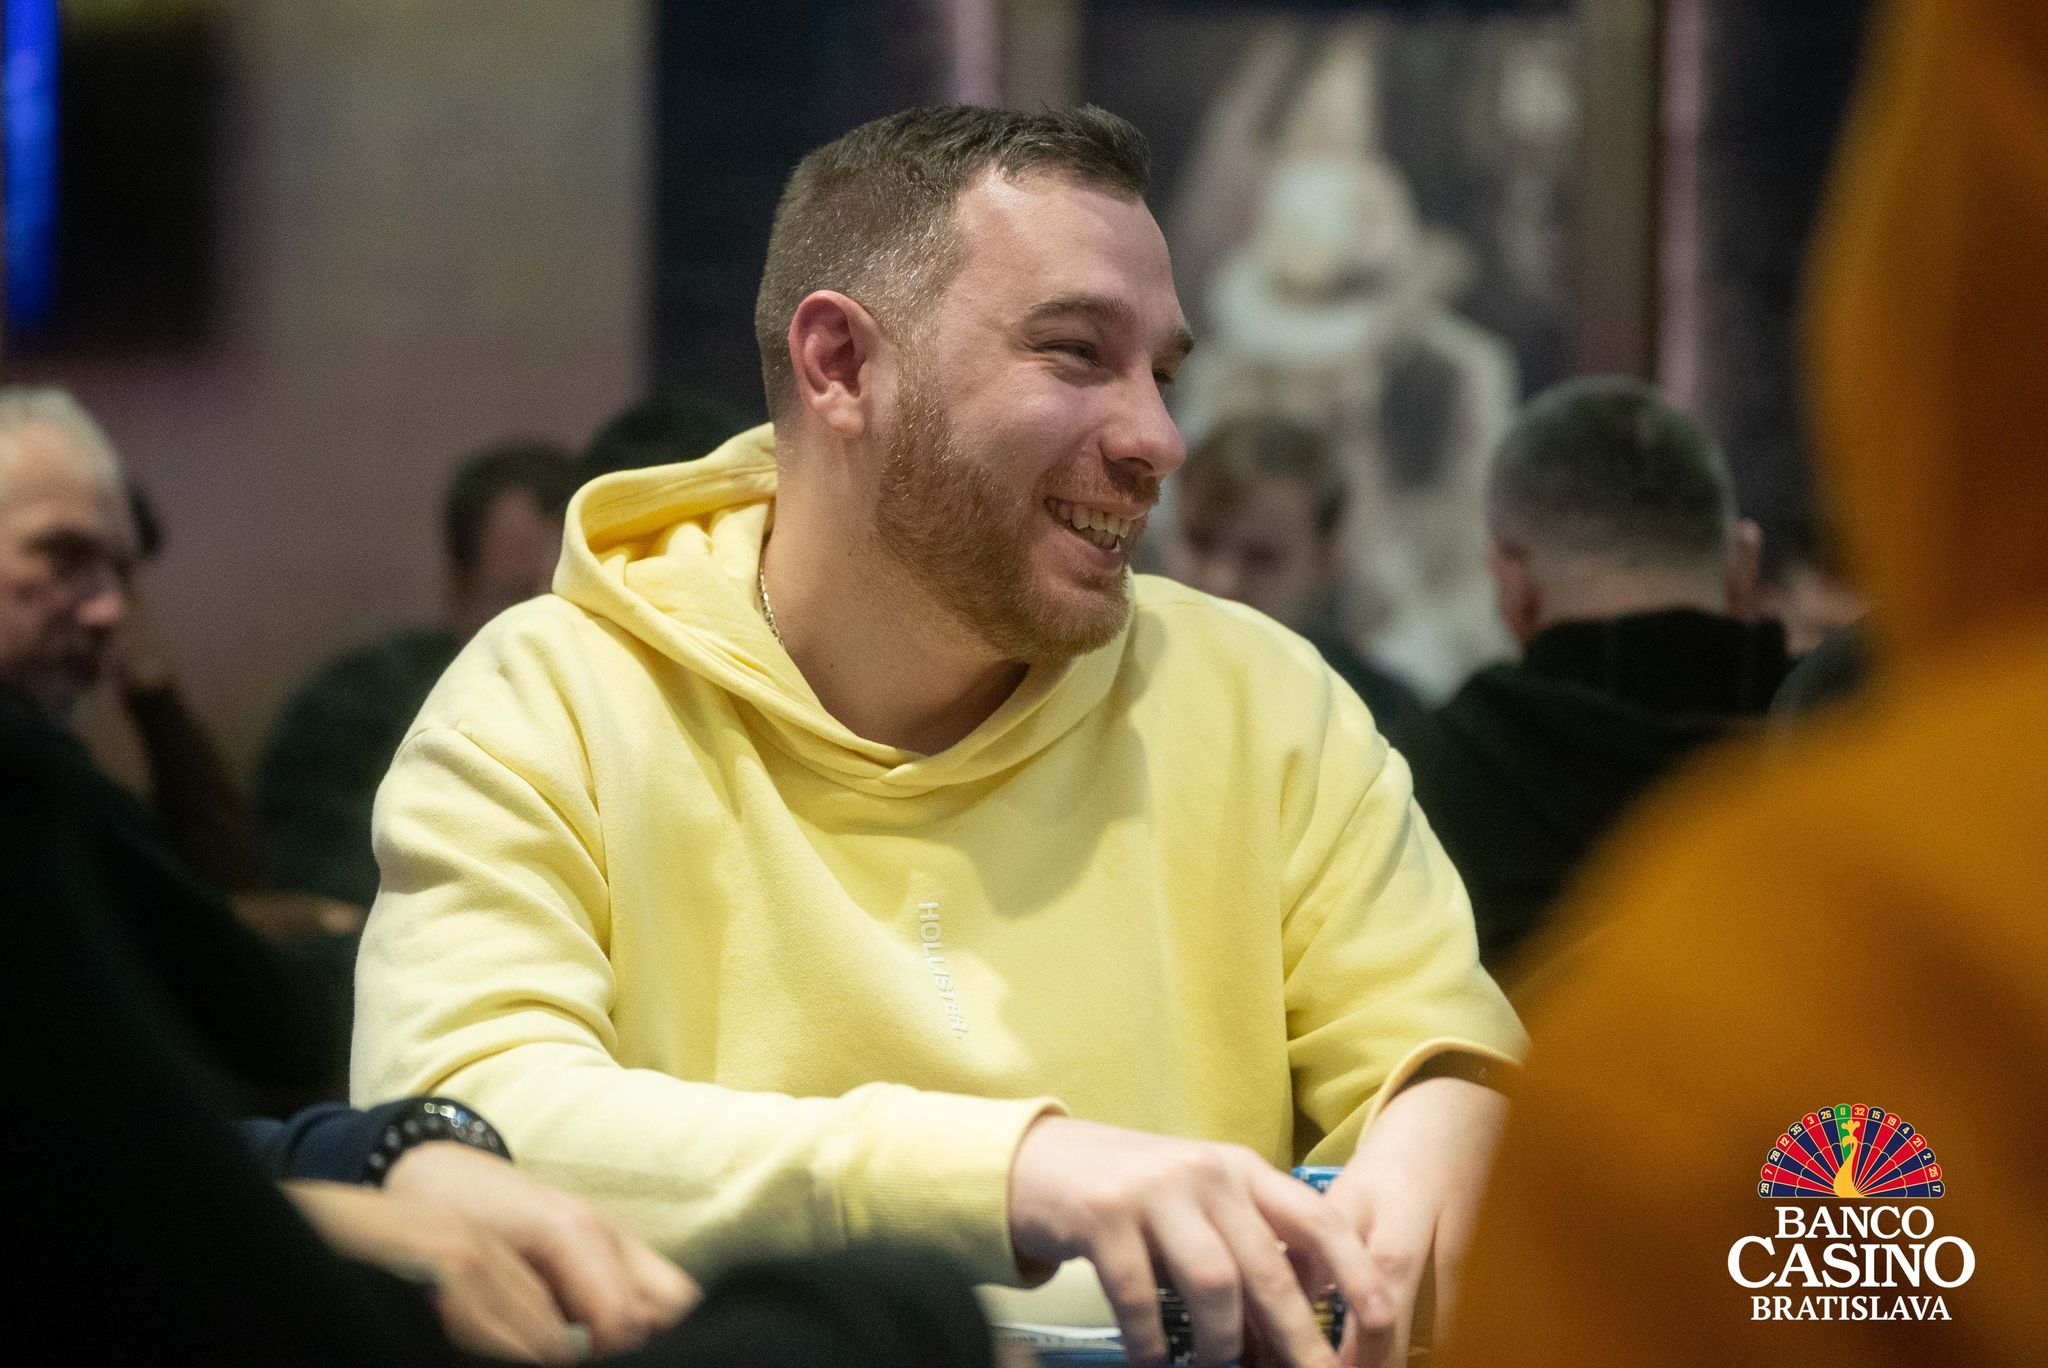 SLOVAK POKER OPEN 300,000€ GTD – 1B: THE POKER ACTION IS PICKING UP – WE MEET ANOTHER 15 ADVANCERS!